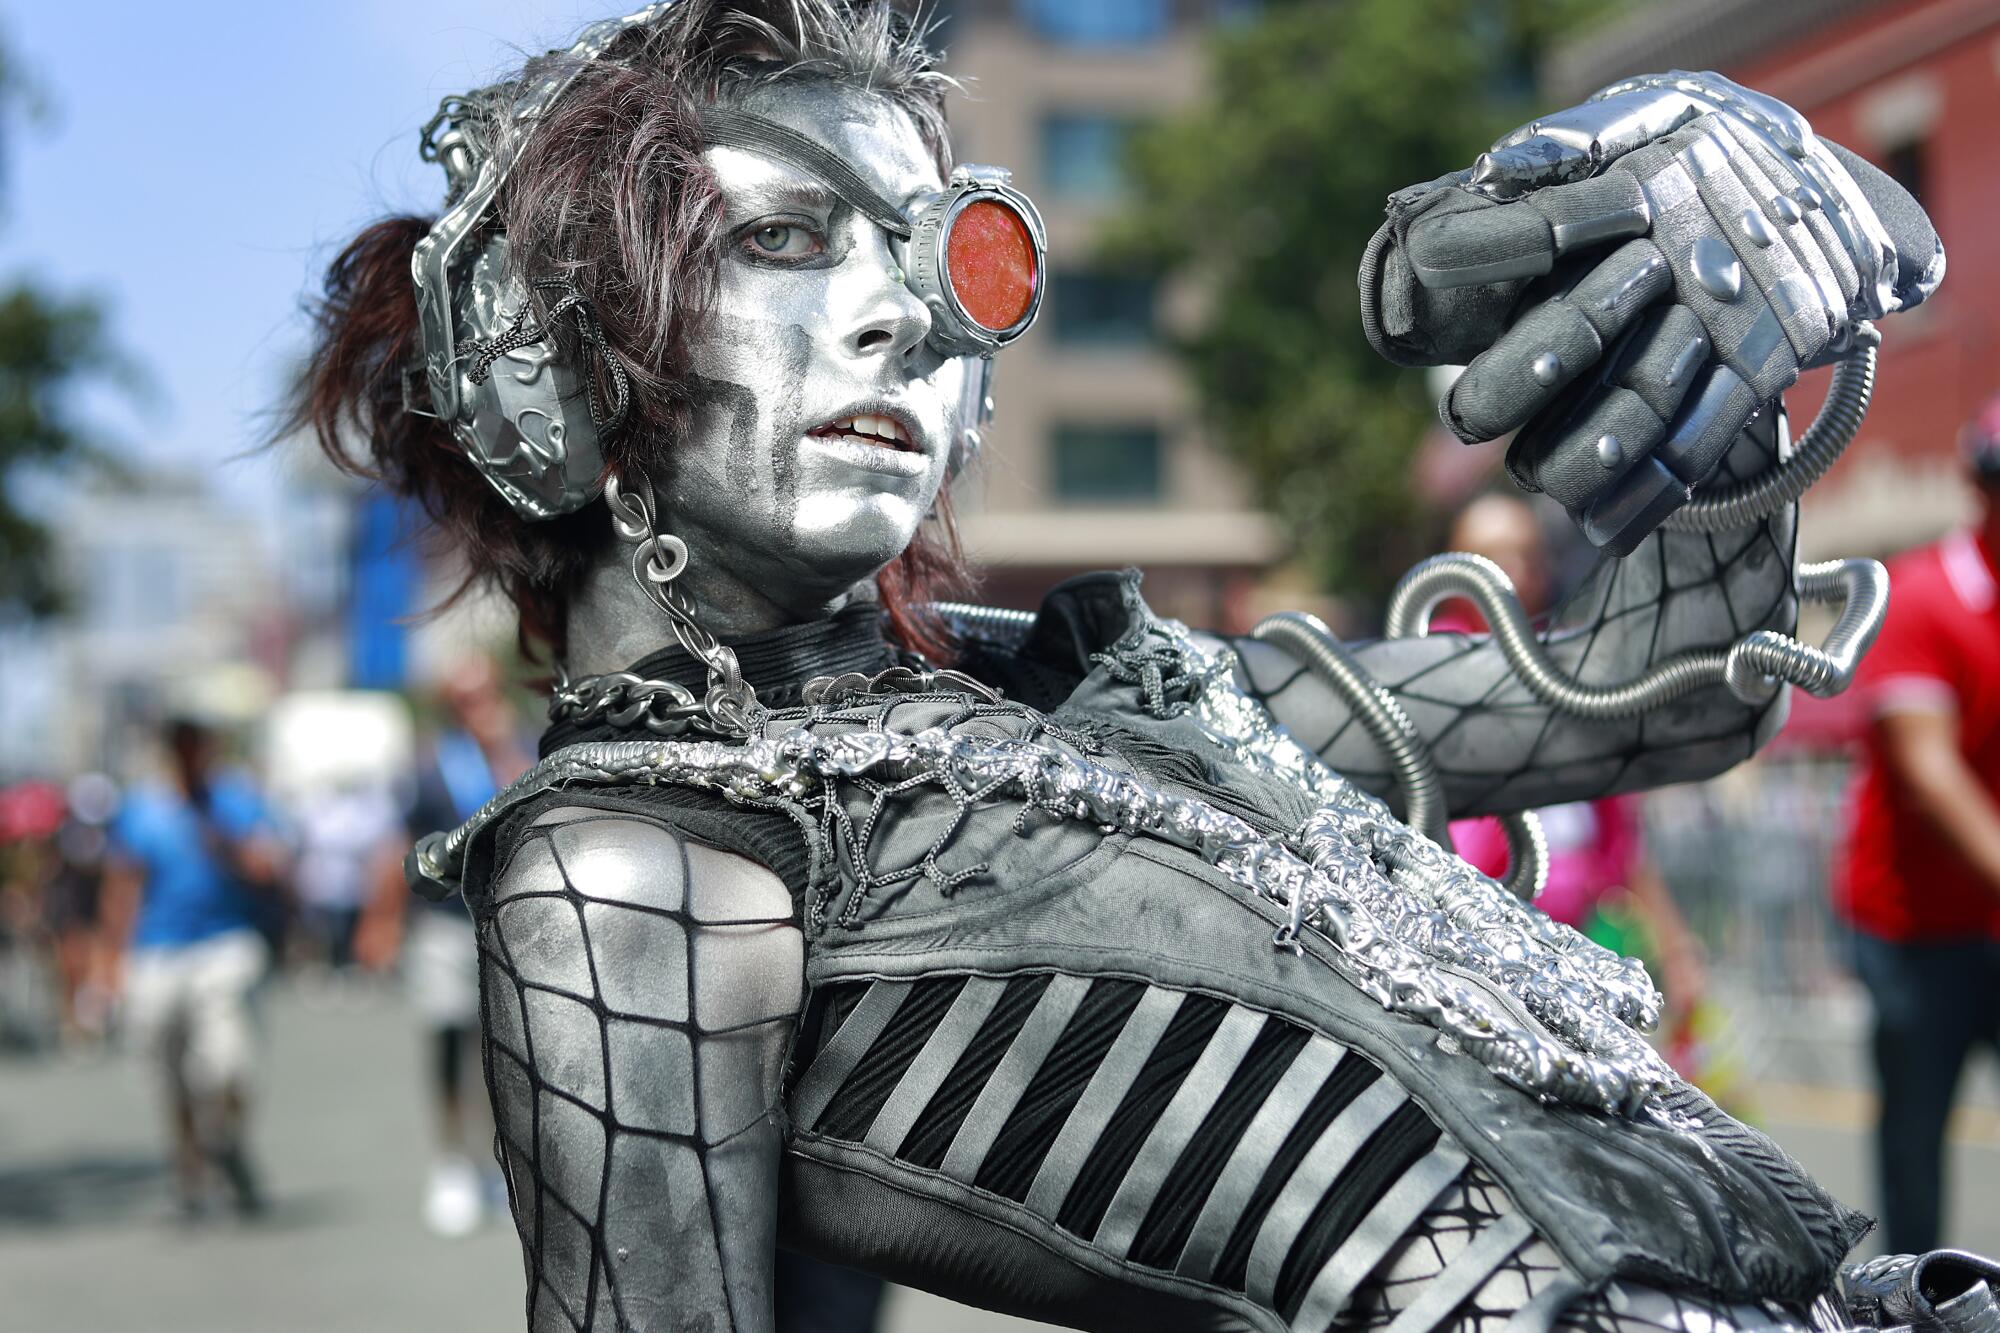 Anya Aston of Fallbrook dressed as a cyborg at Comic-Con in San Diego.